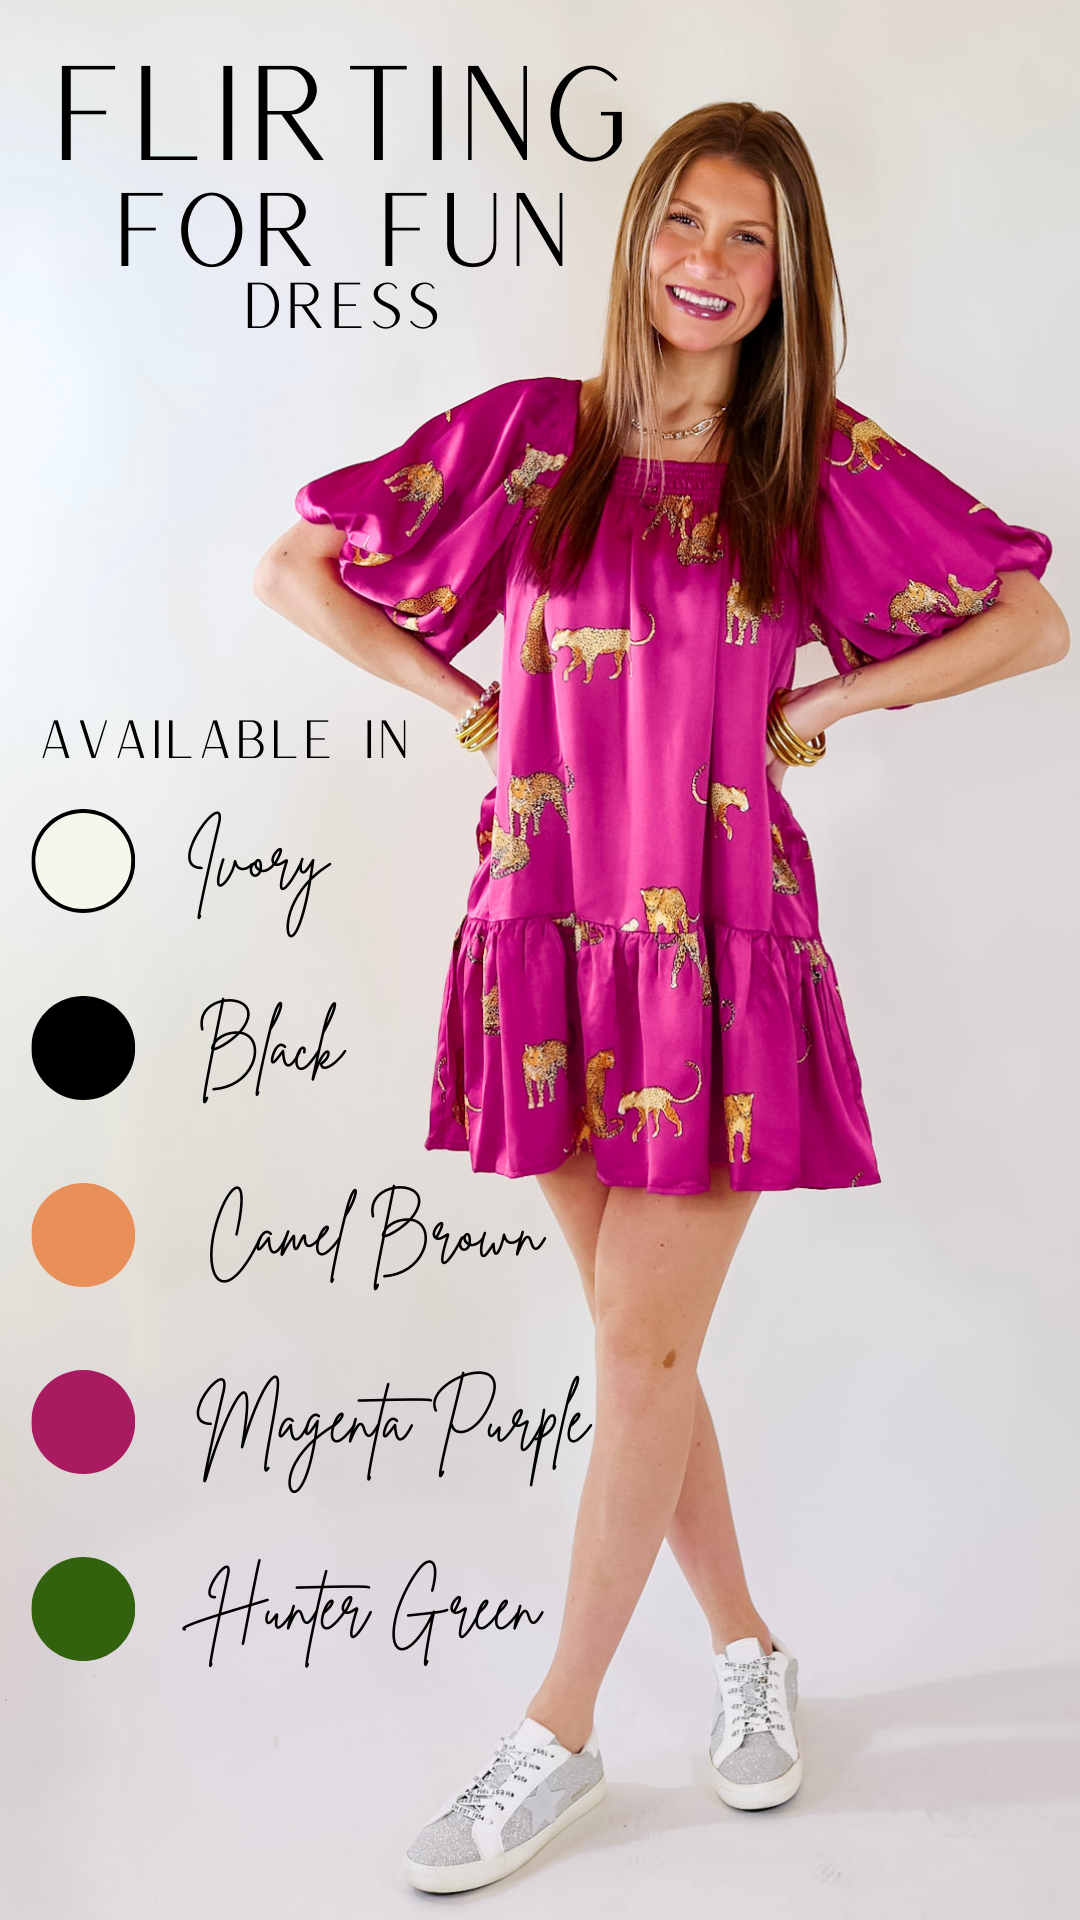 Flirting For Fun Leopard Print Satin Midi Dress in Magenta Pink - Giddy Up Glamour Boutique